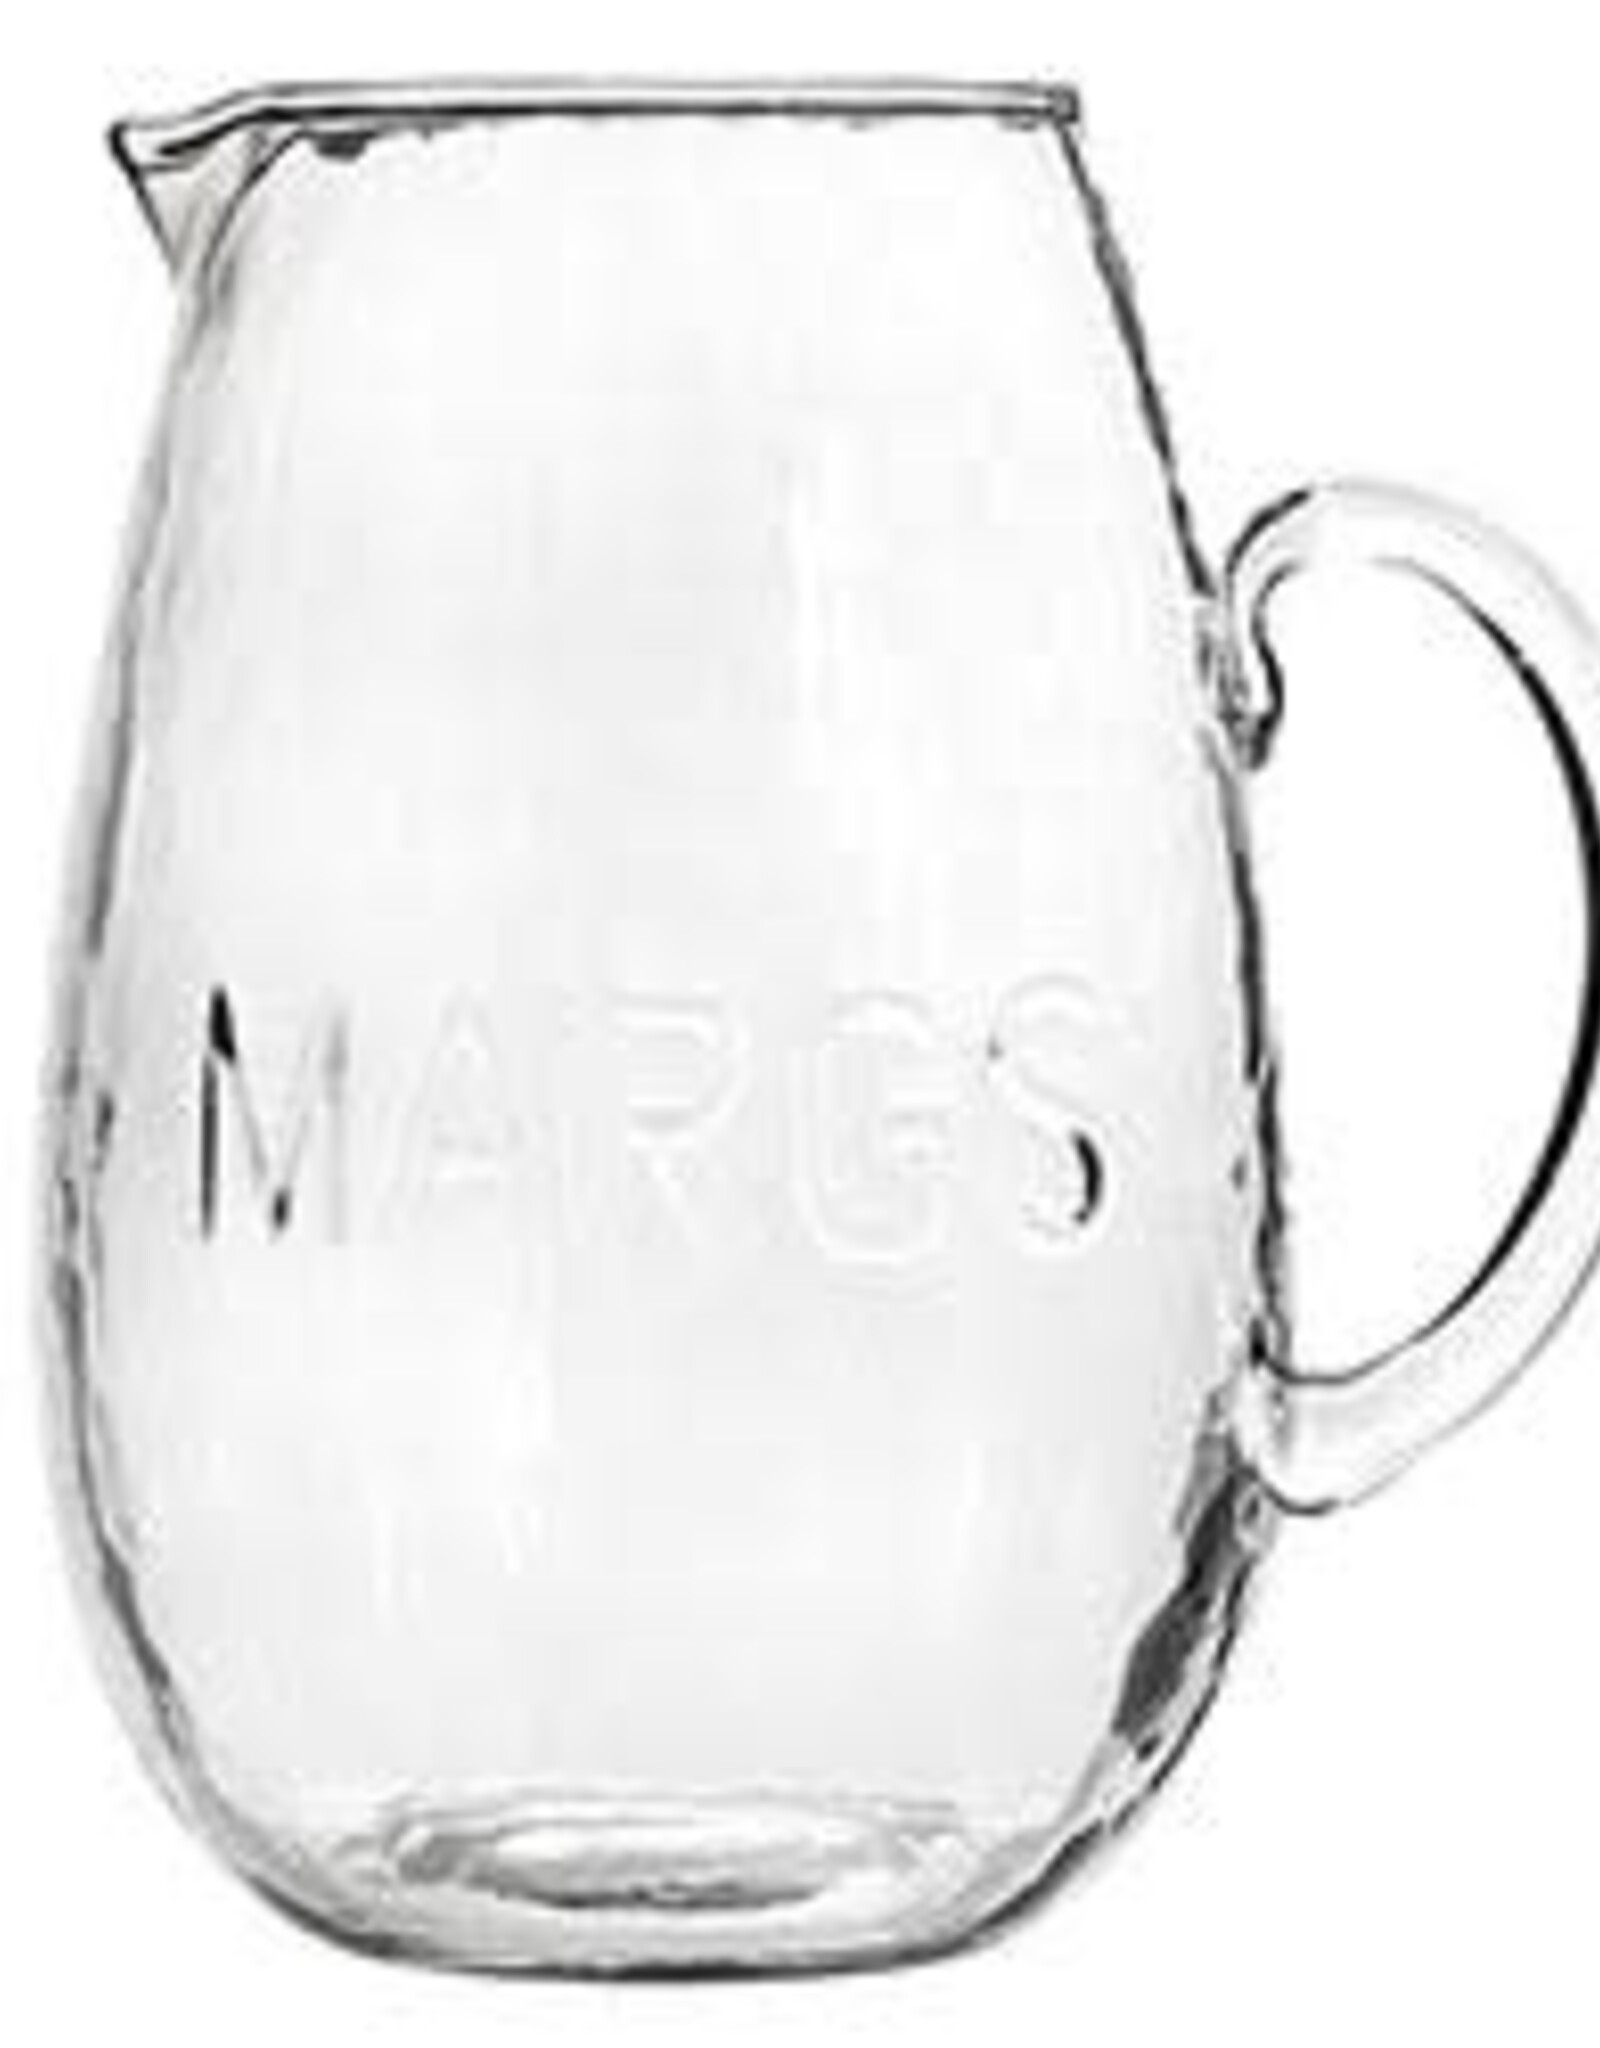 Margs Hammered Pitcher